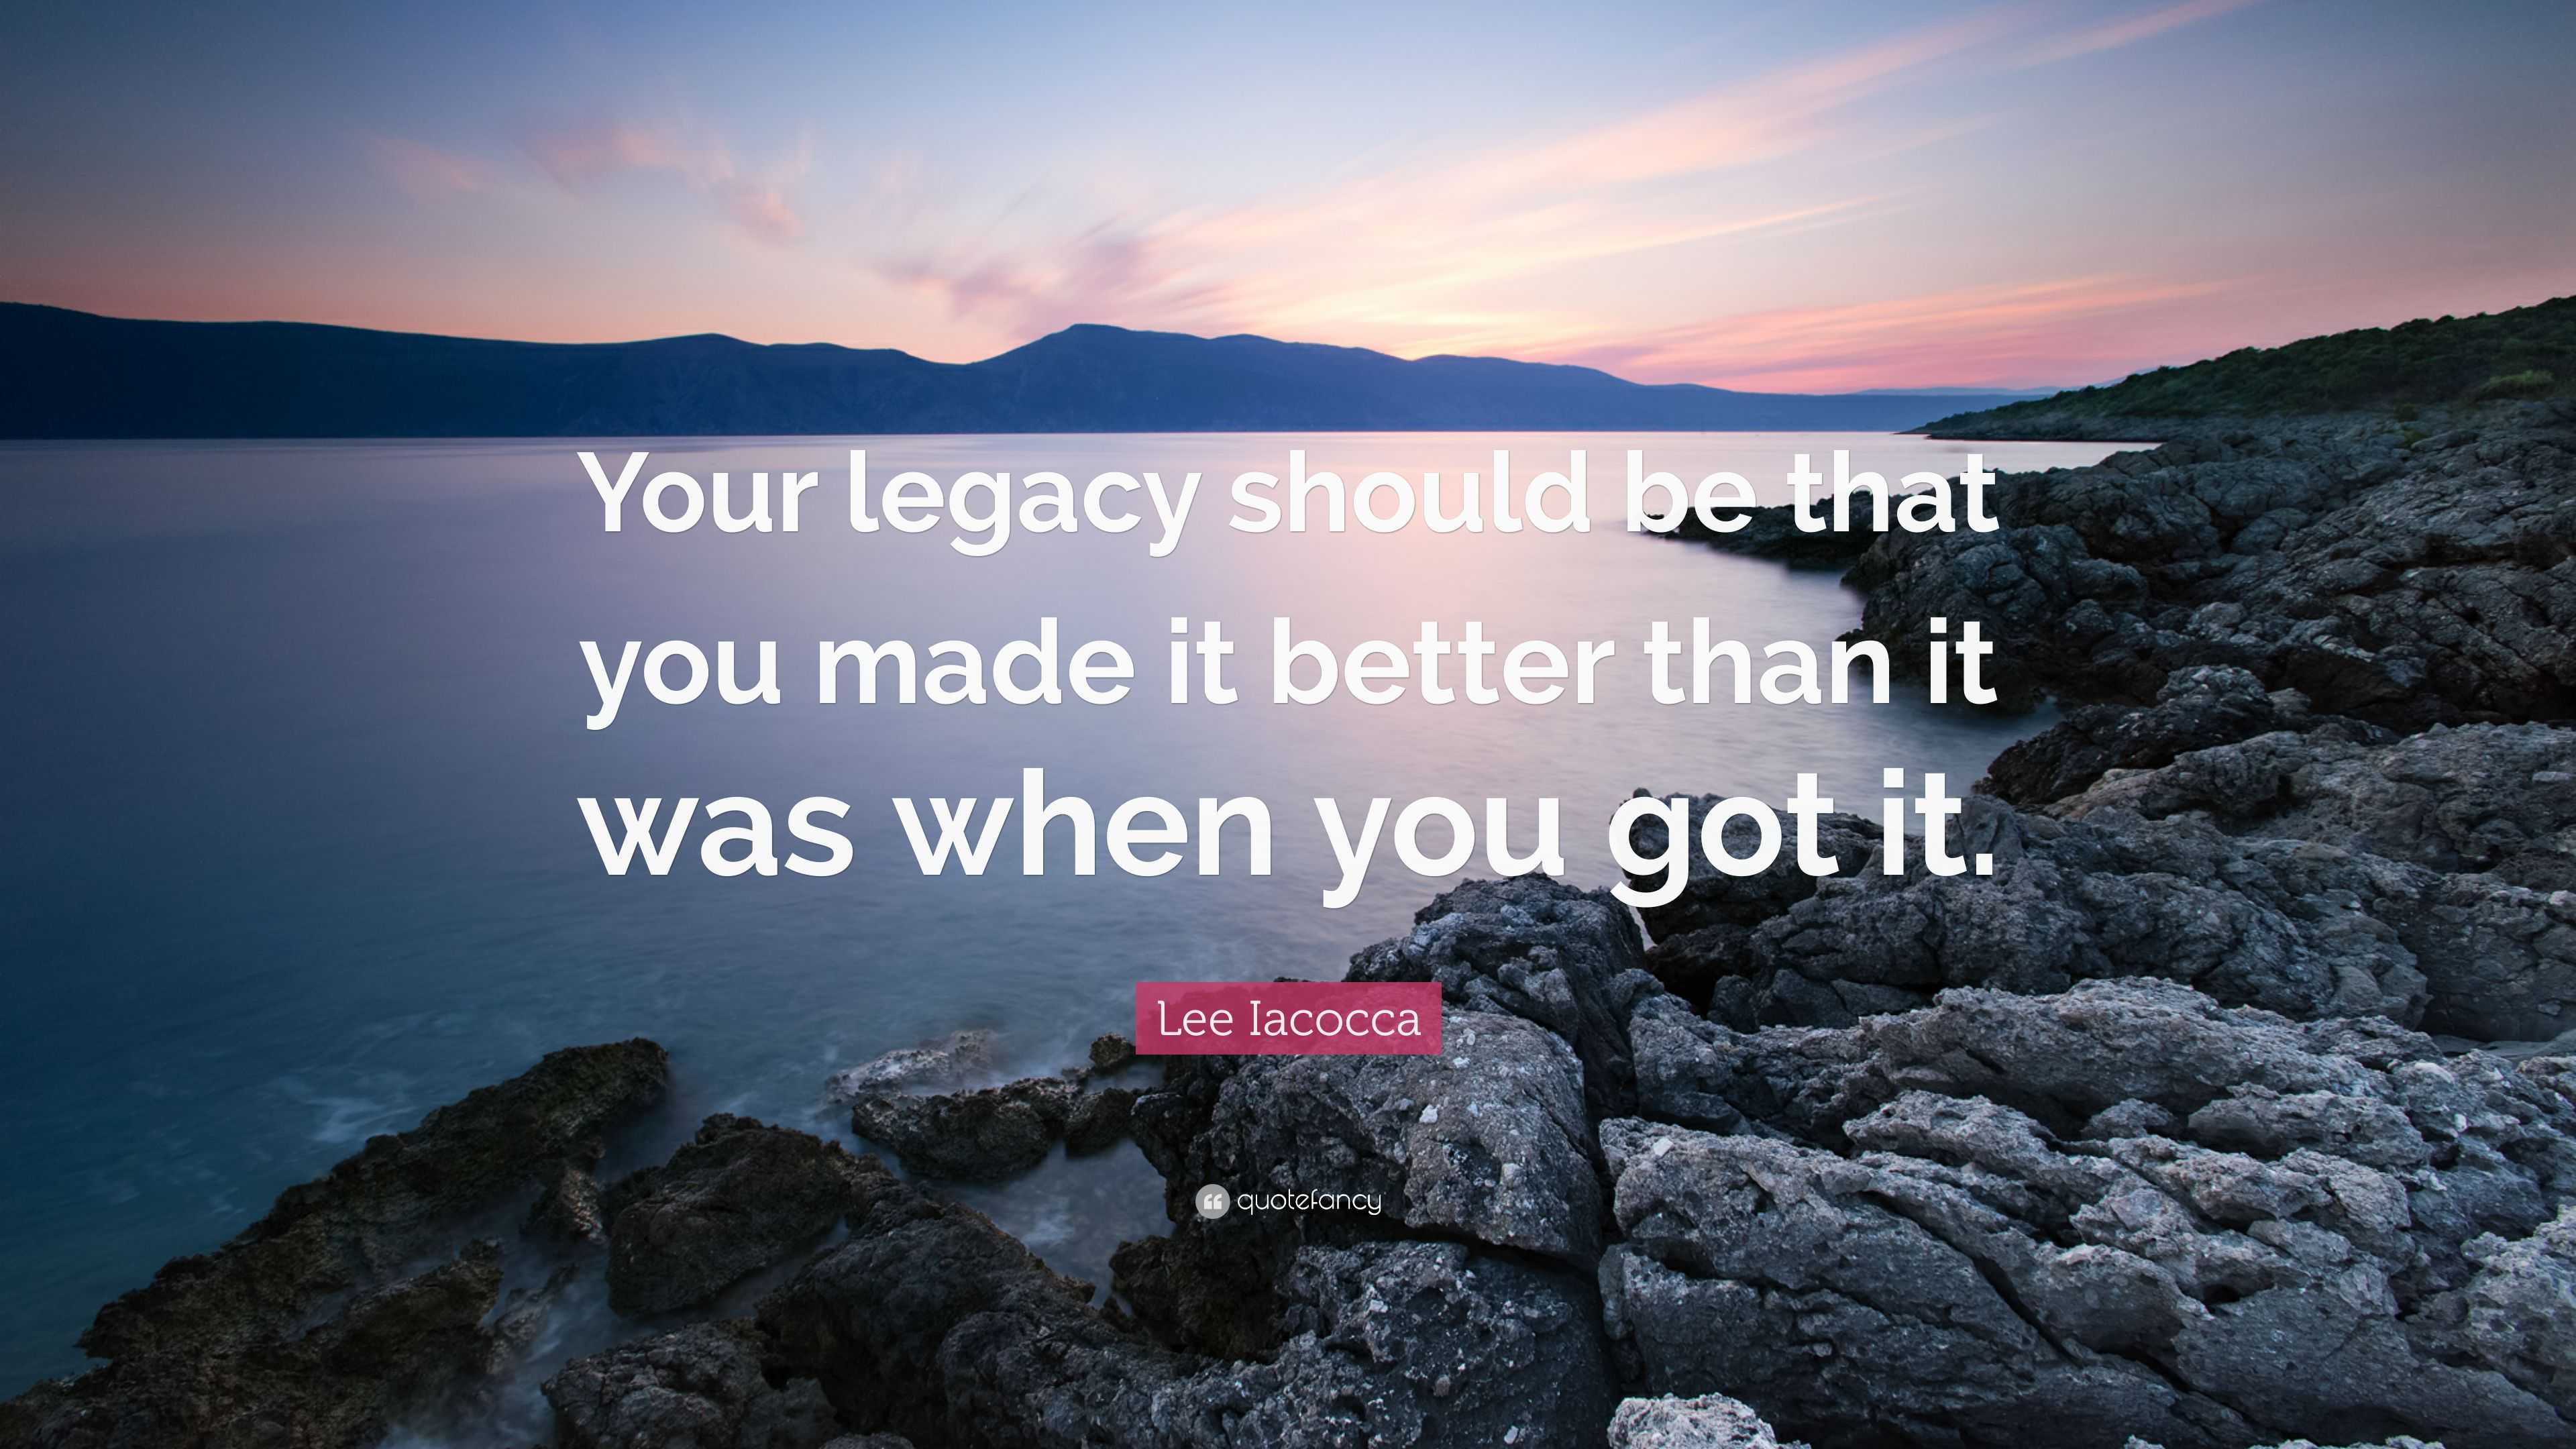 Lee Iacocca Quote: “Your legacy should be that you made it better than it  was when